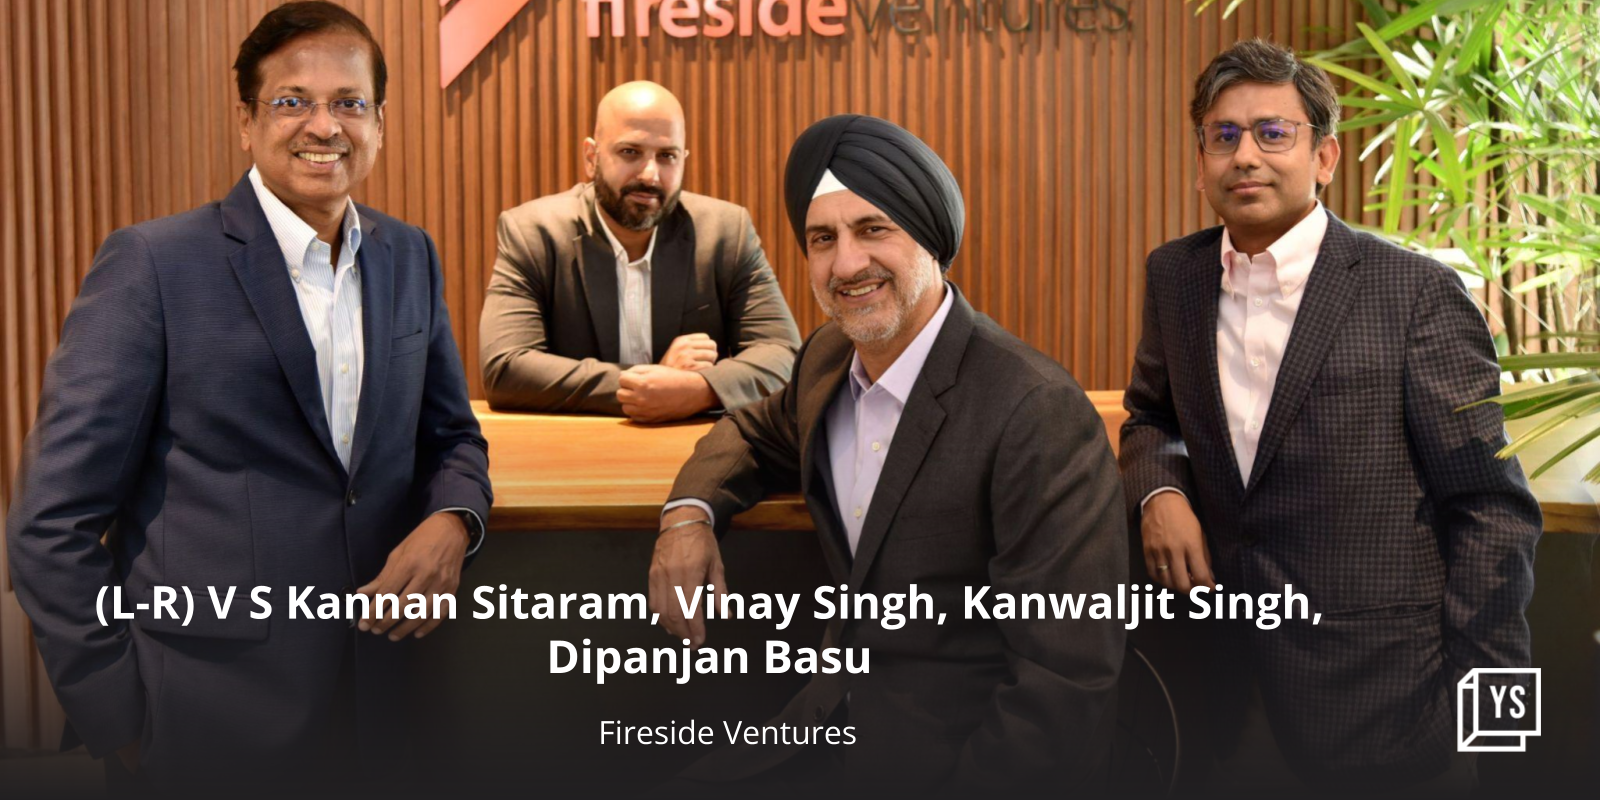 Fireside Ventures raises $225M for its third fund